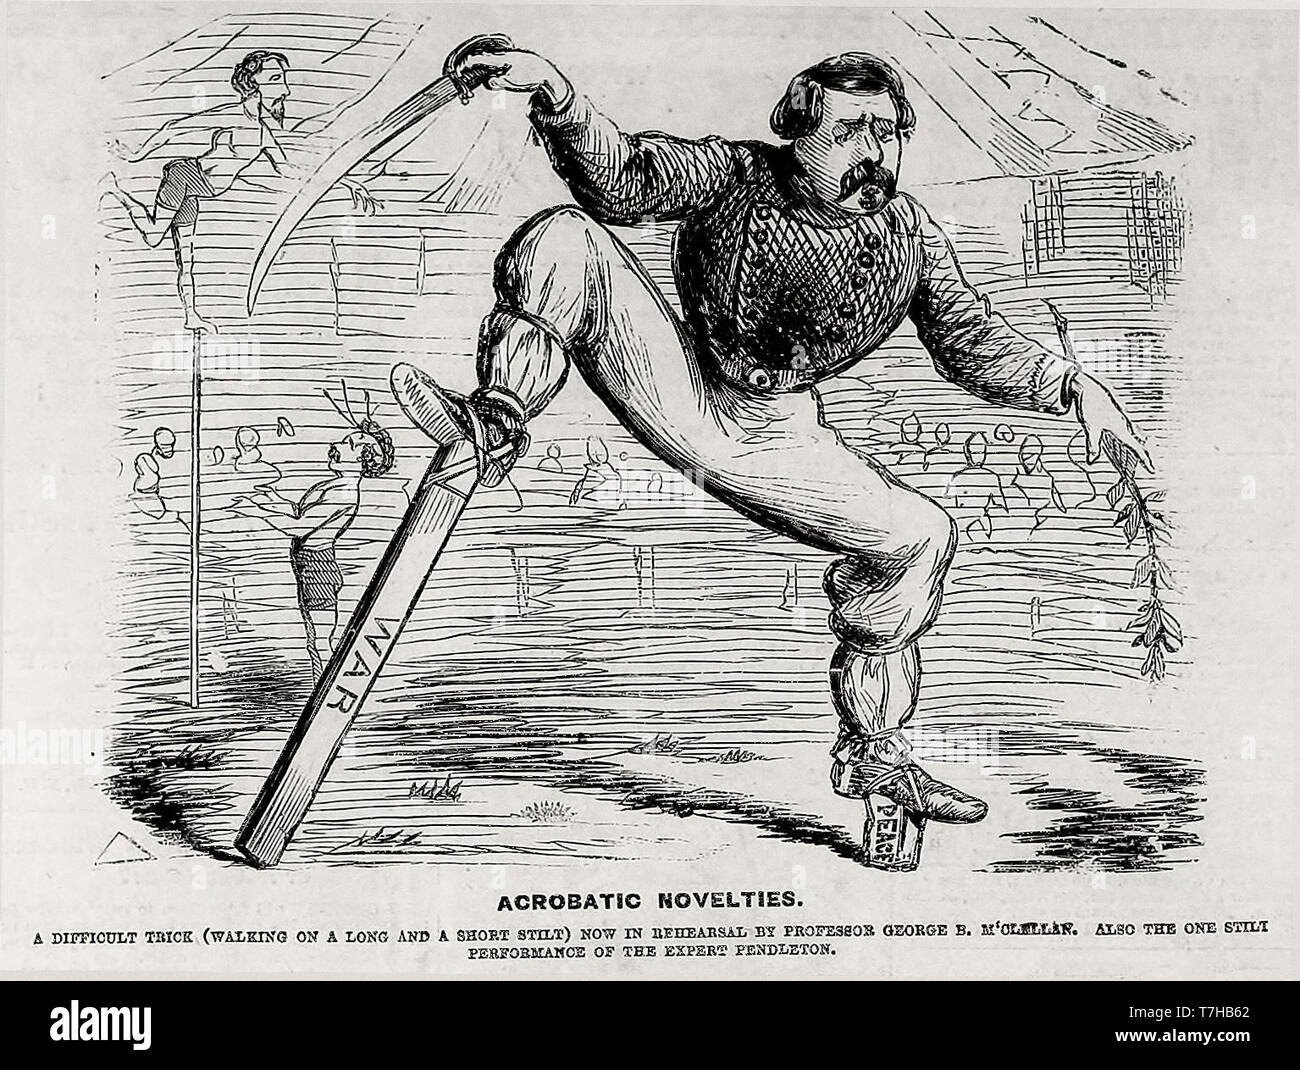 Acrobatic Novelties - A difficult trick (Walking on a long and short stilt) now in rehearsal by Professor George B McClellan. Also the one stilt performance of the expert Pendleton.  Political Cartoon for the 1864 USA Election Stock Photo